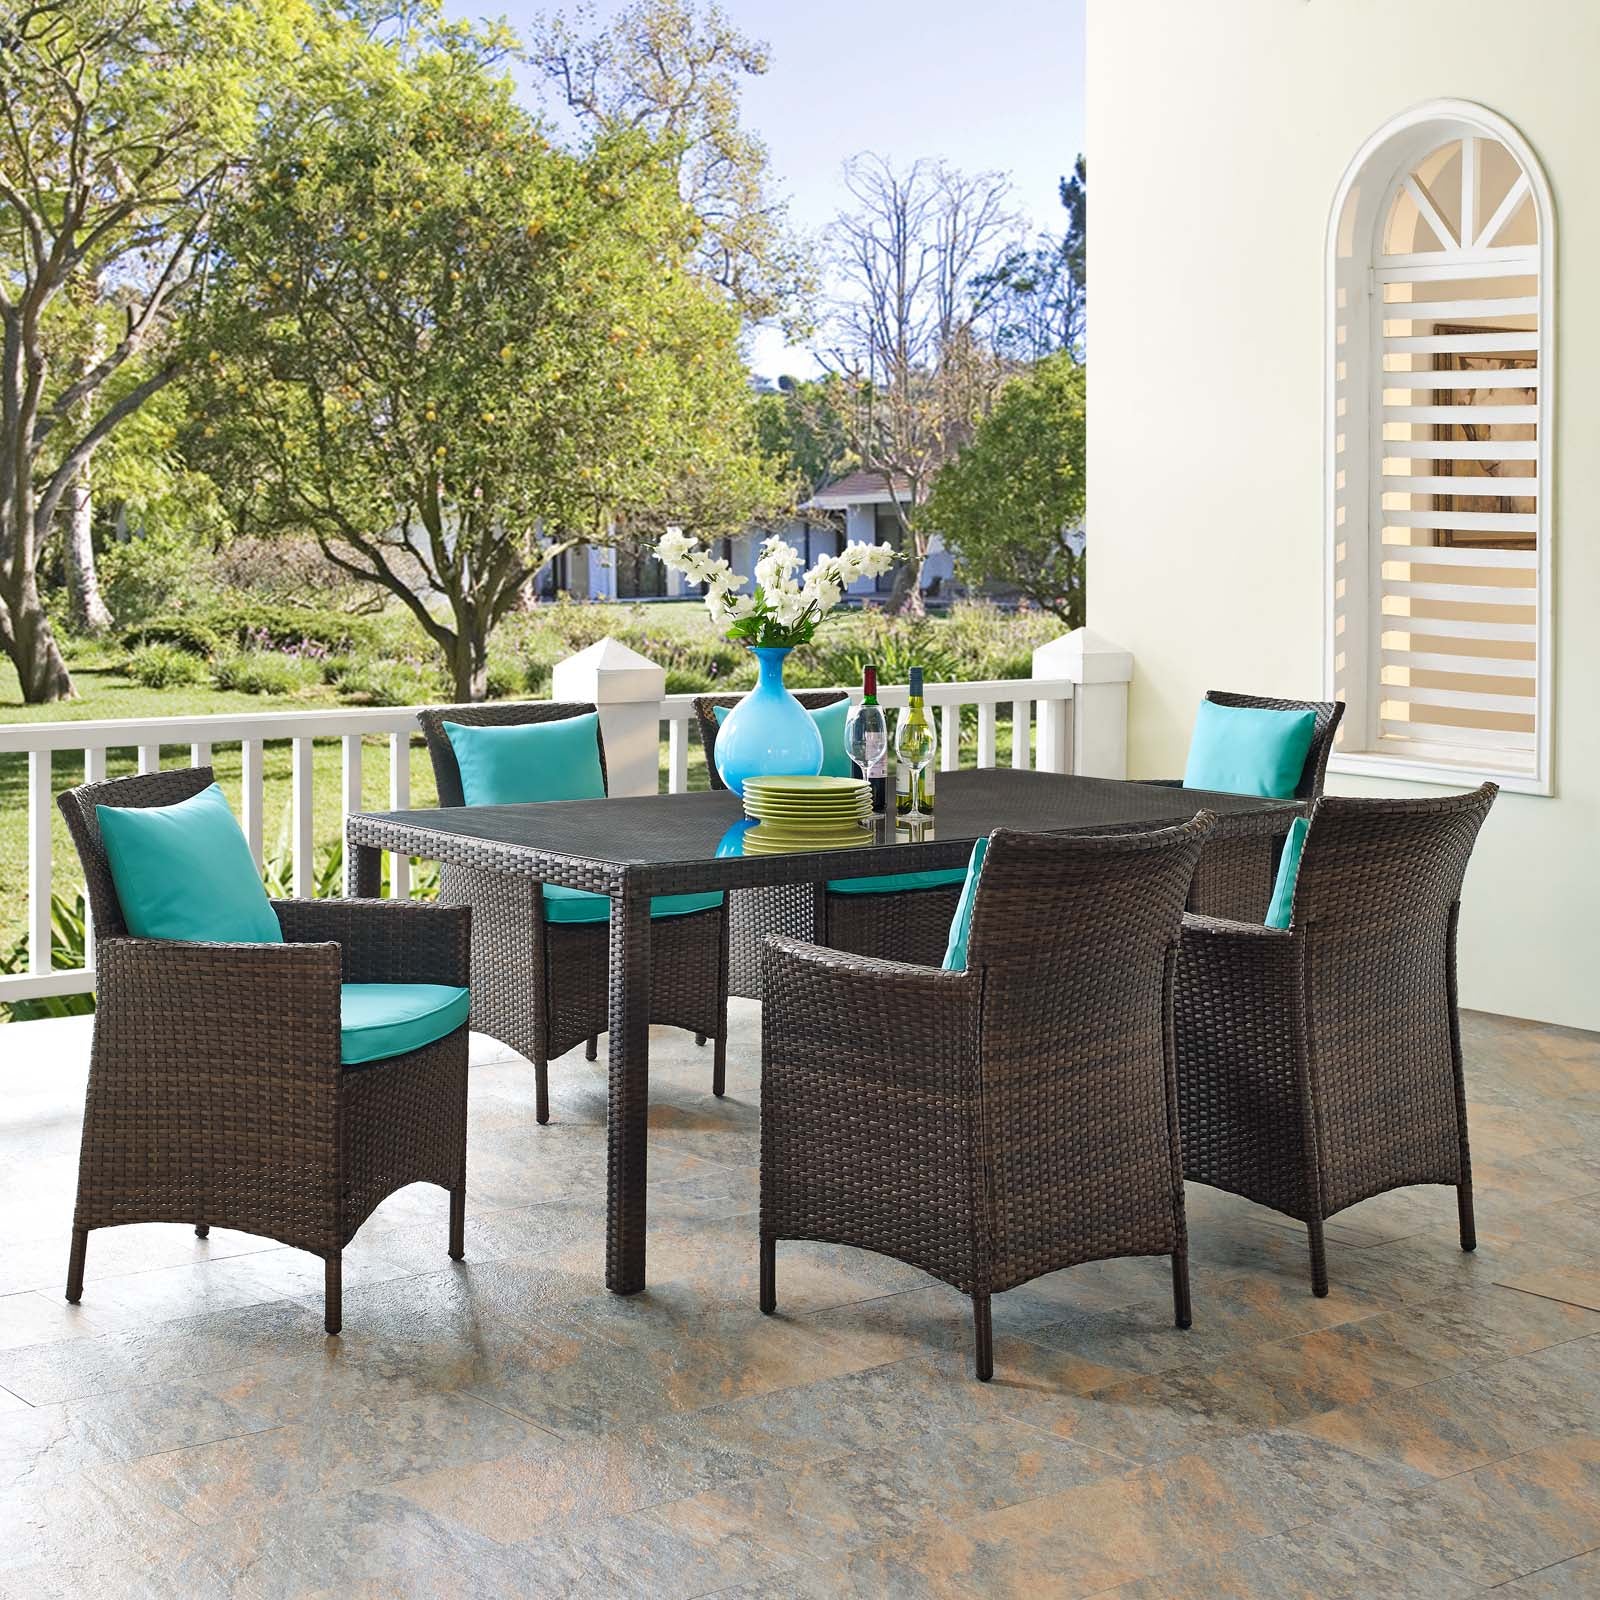 Modway Outdoor Dining Sets - Conduit 7 Piece Outdoor Patio Wicker Rattan Dining Set Brown Turquoise